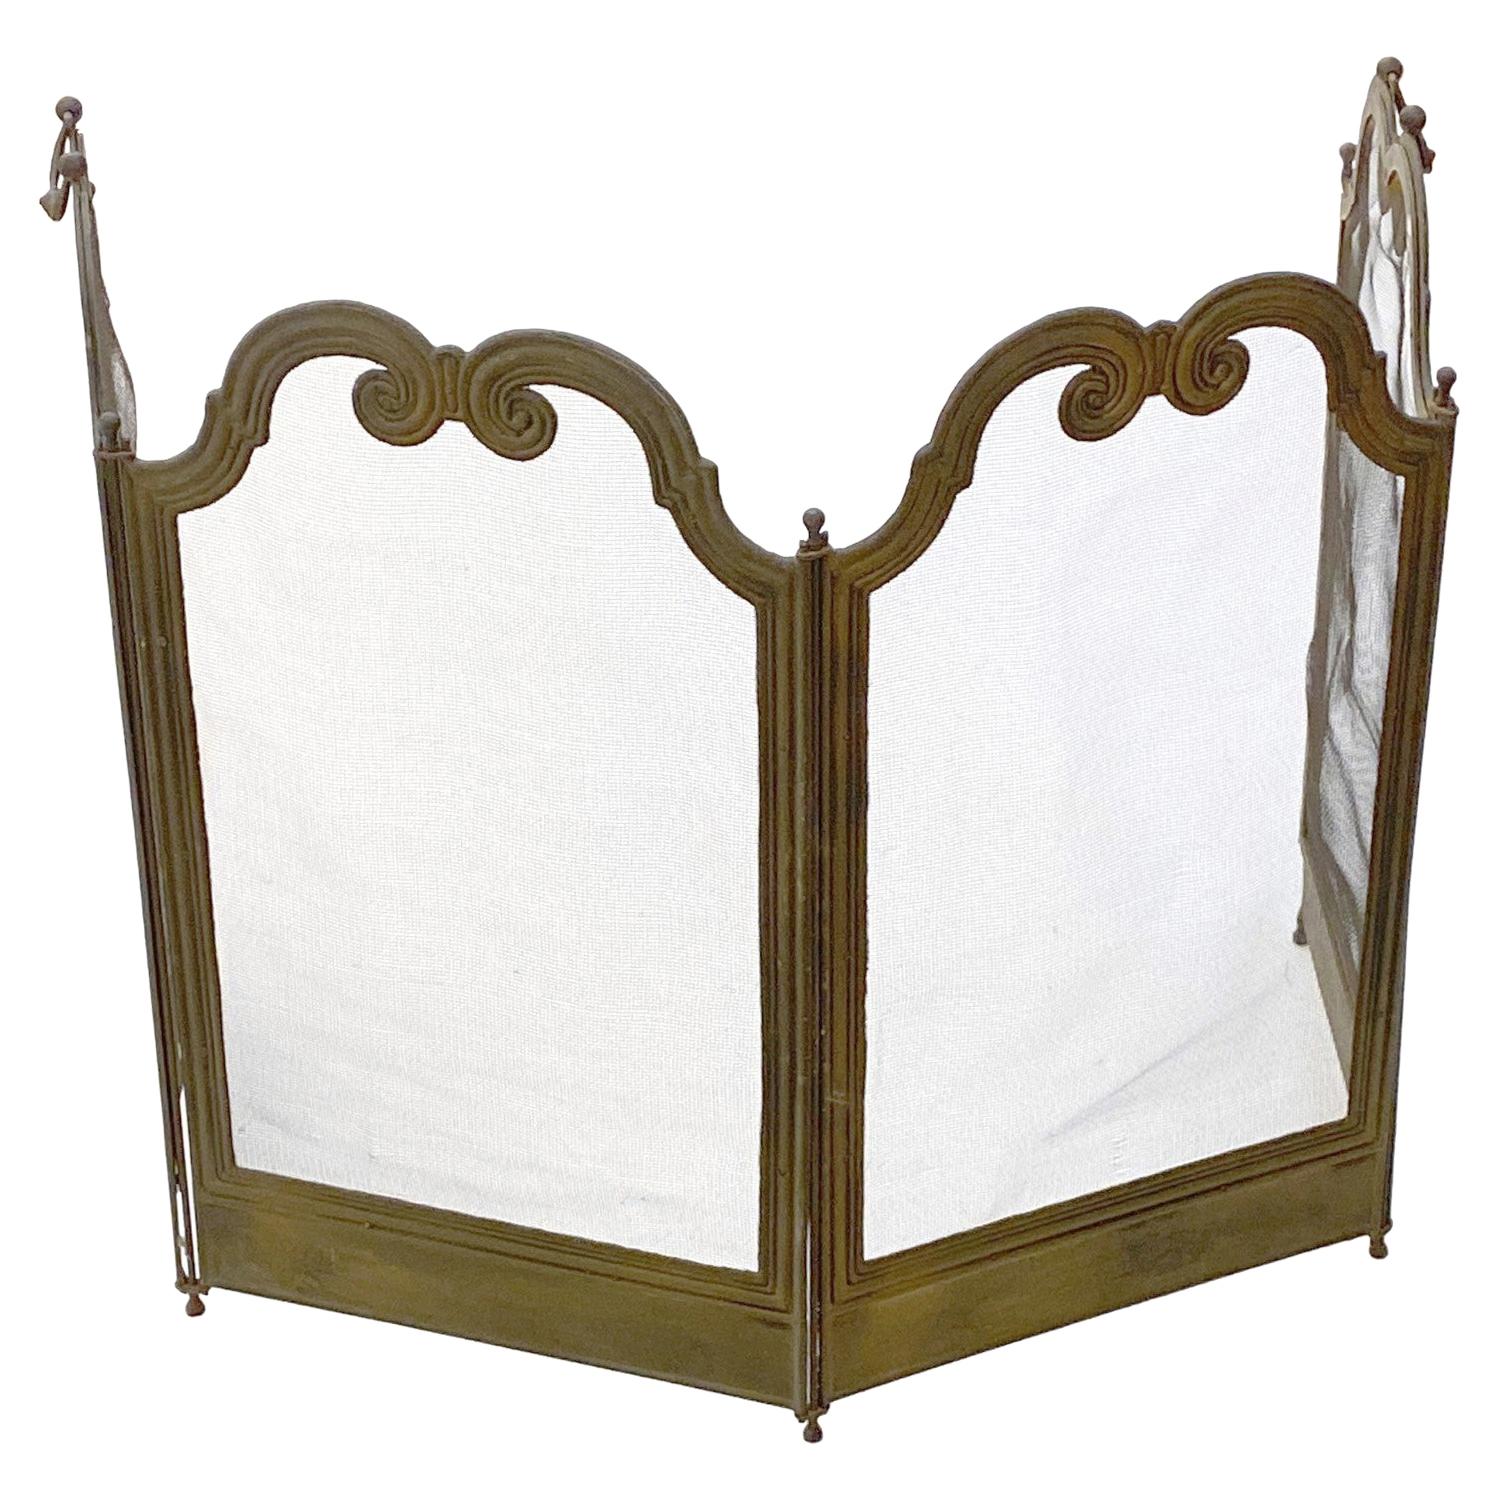 French Petite Fireplace Screen Hinged in 4 Sections with Handles, Ajustable